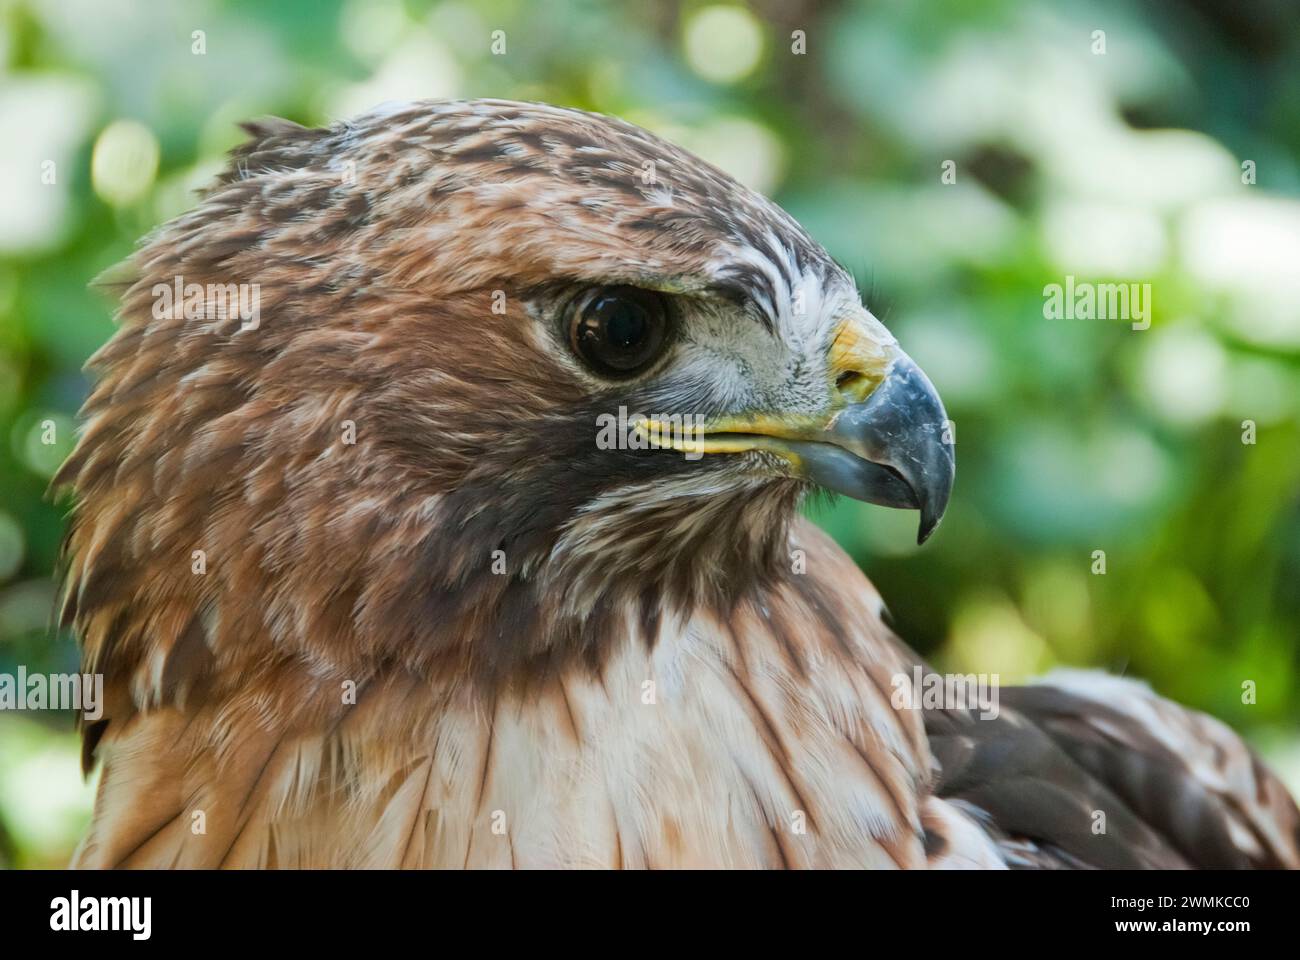 Close-up portrait of the head of a Broad-winged Hawk (Buteo platypterus) Stock Photo